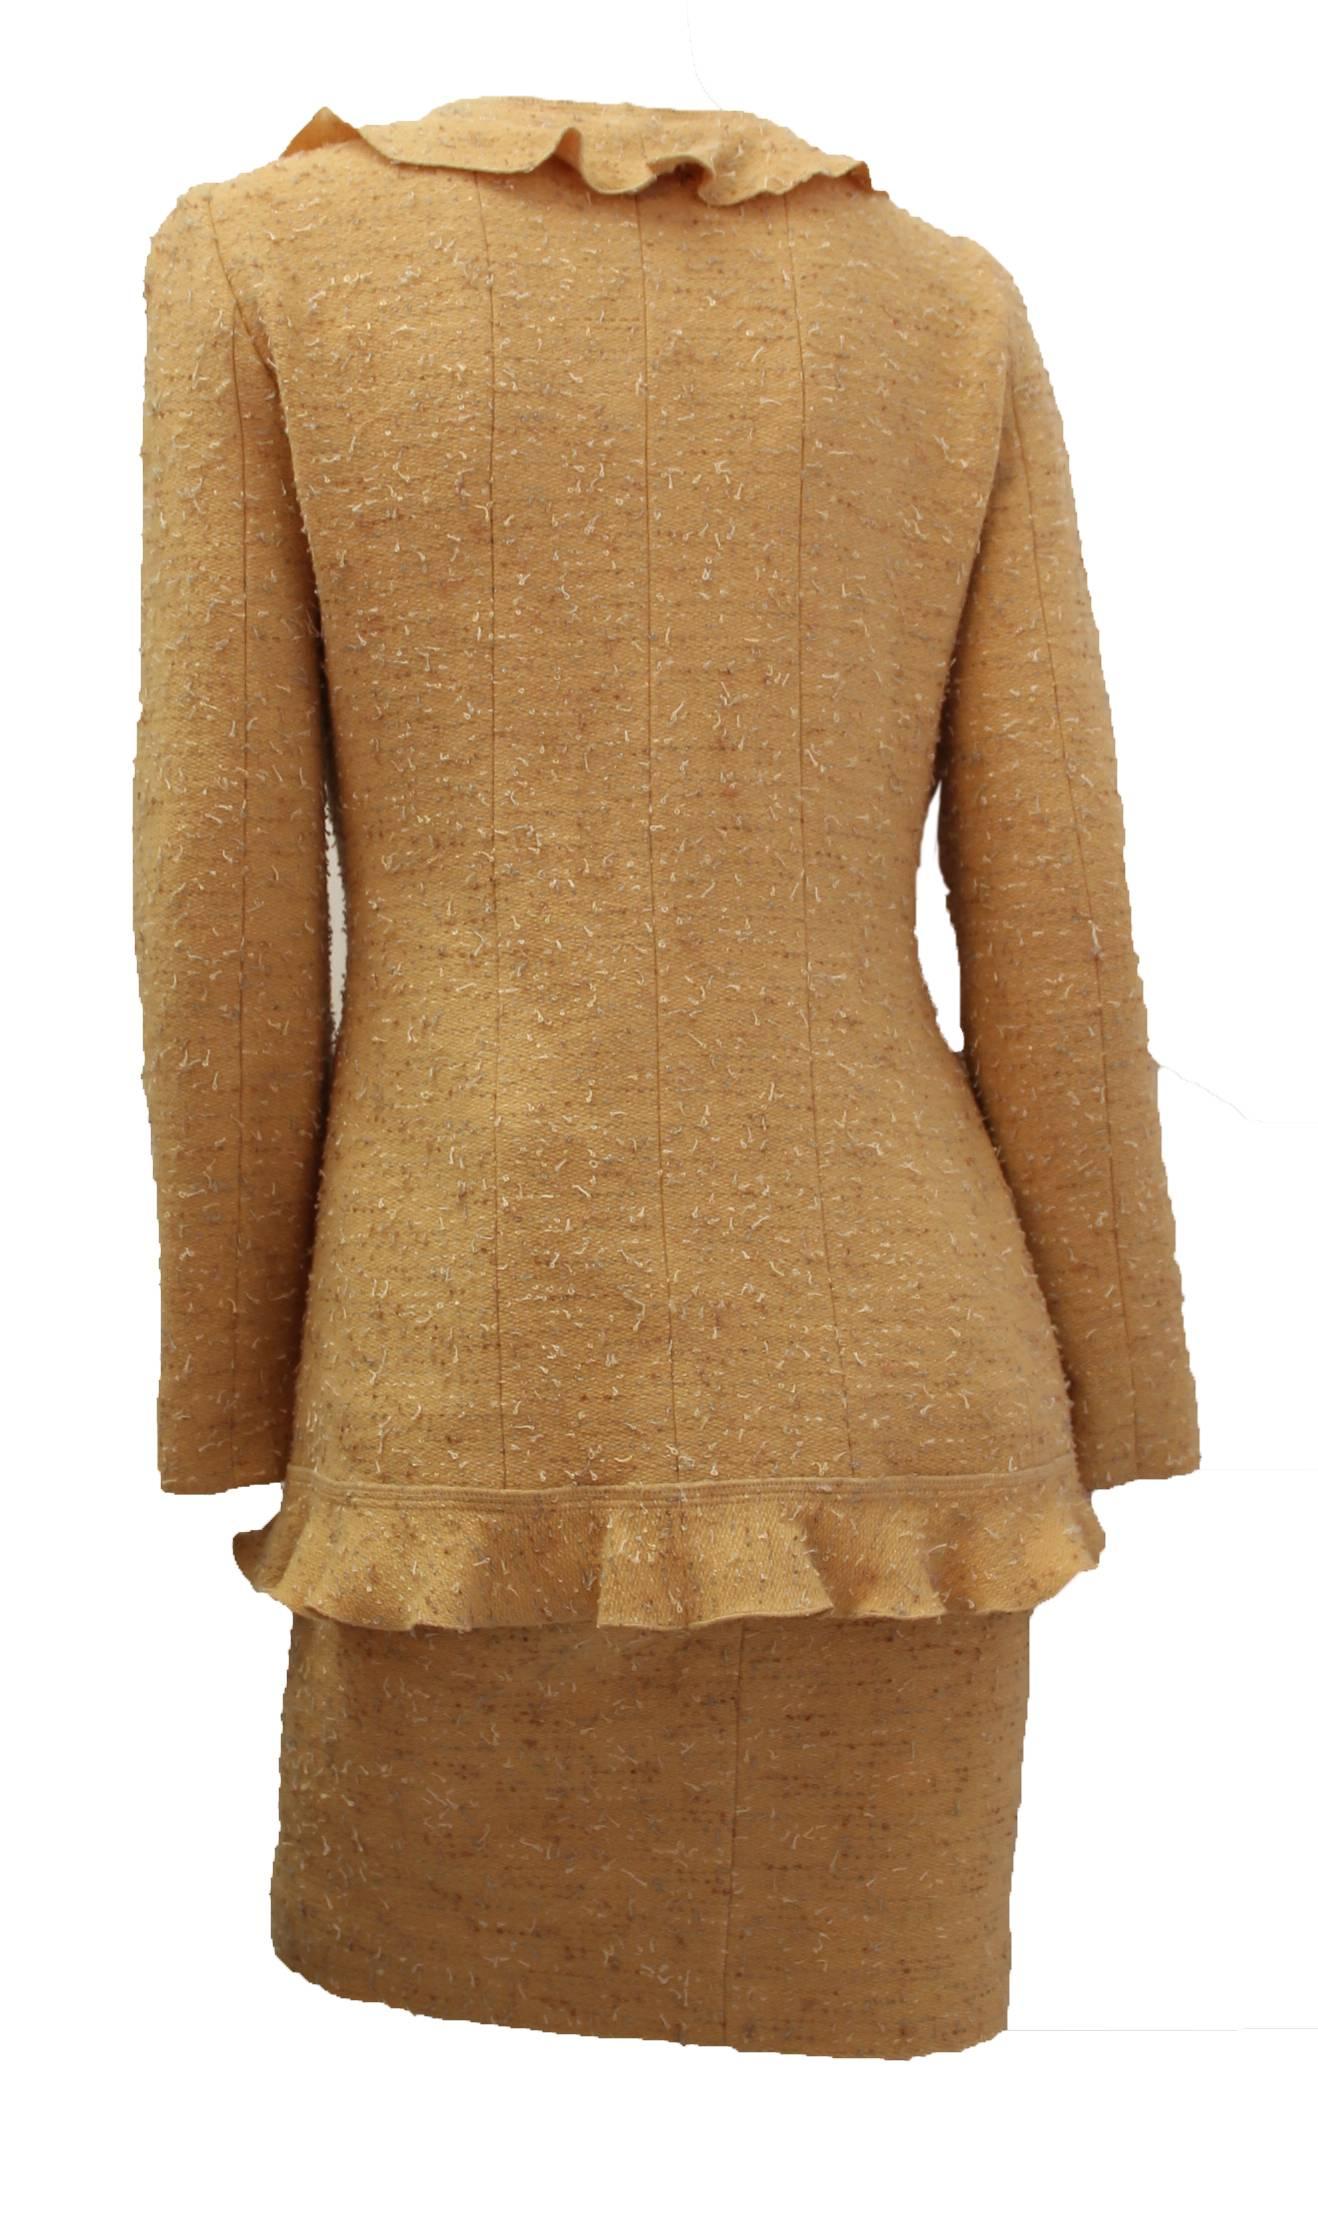 1990s Chanel pale saffron wool tweed suit with fluted trim and silk lining. 

Measurements: 
Jacket
Shoulder: 15